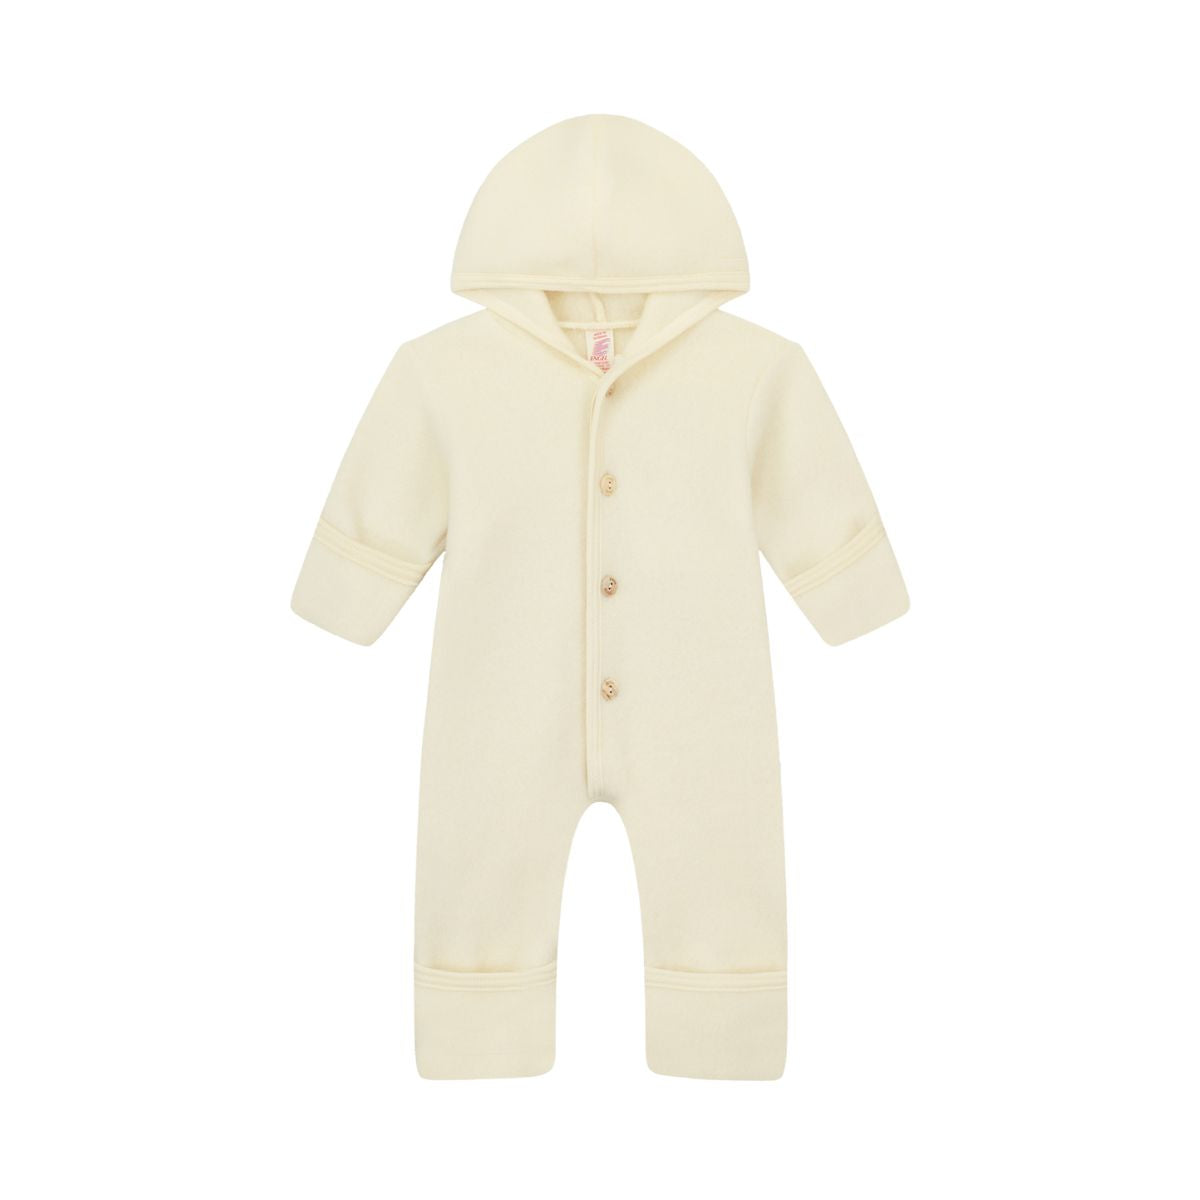 Merino Wool Baby Overall Natural Engel Natur The Archive Store